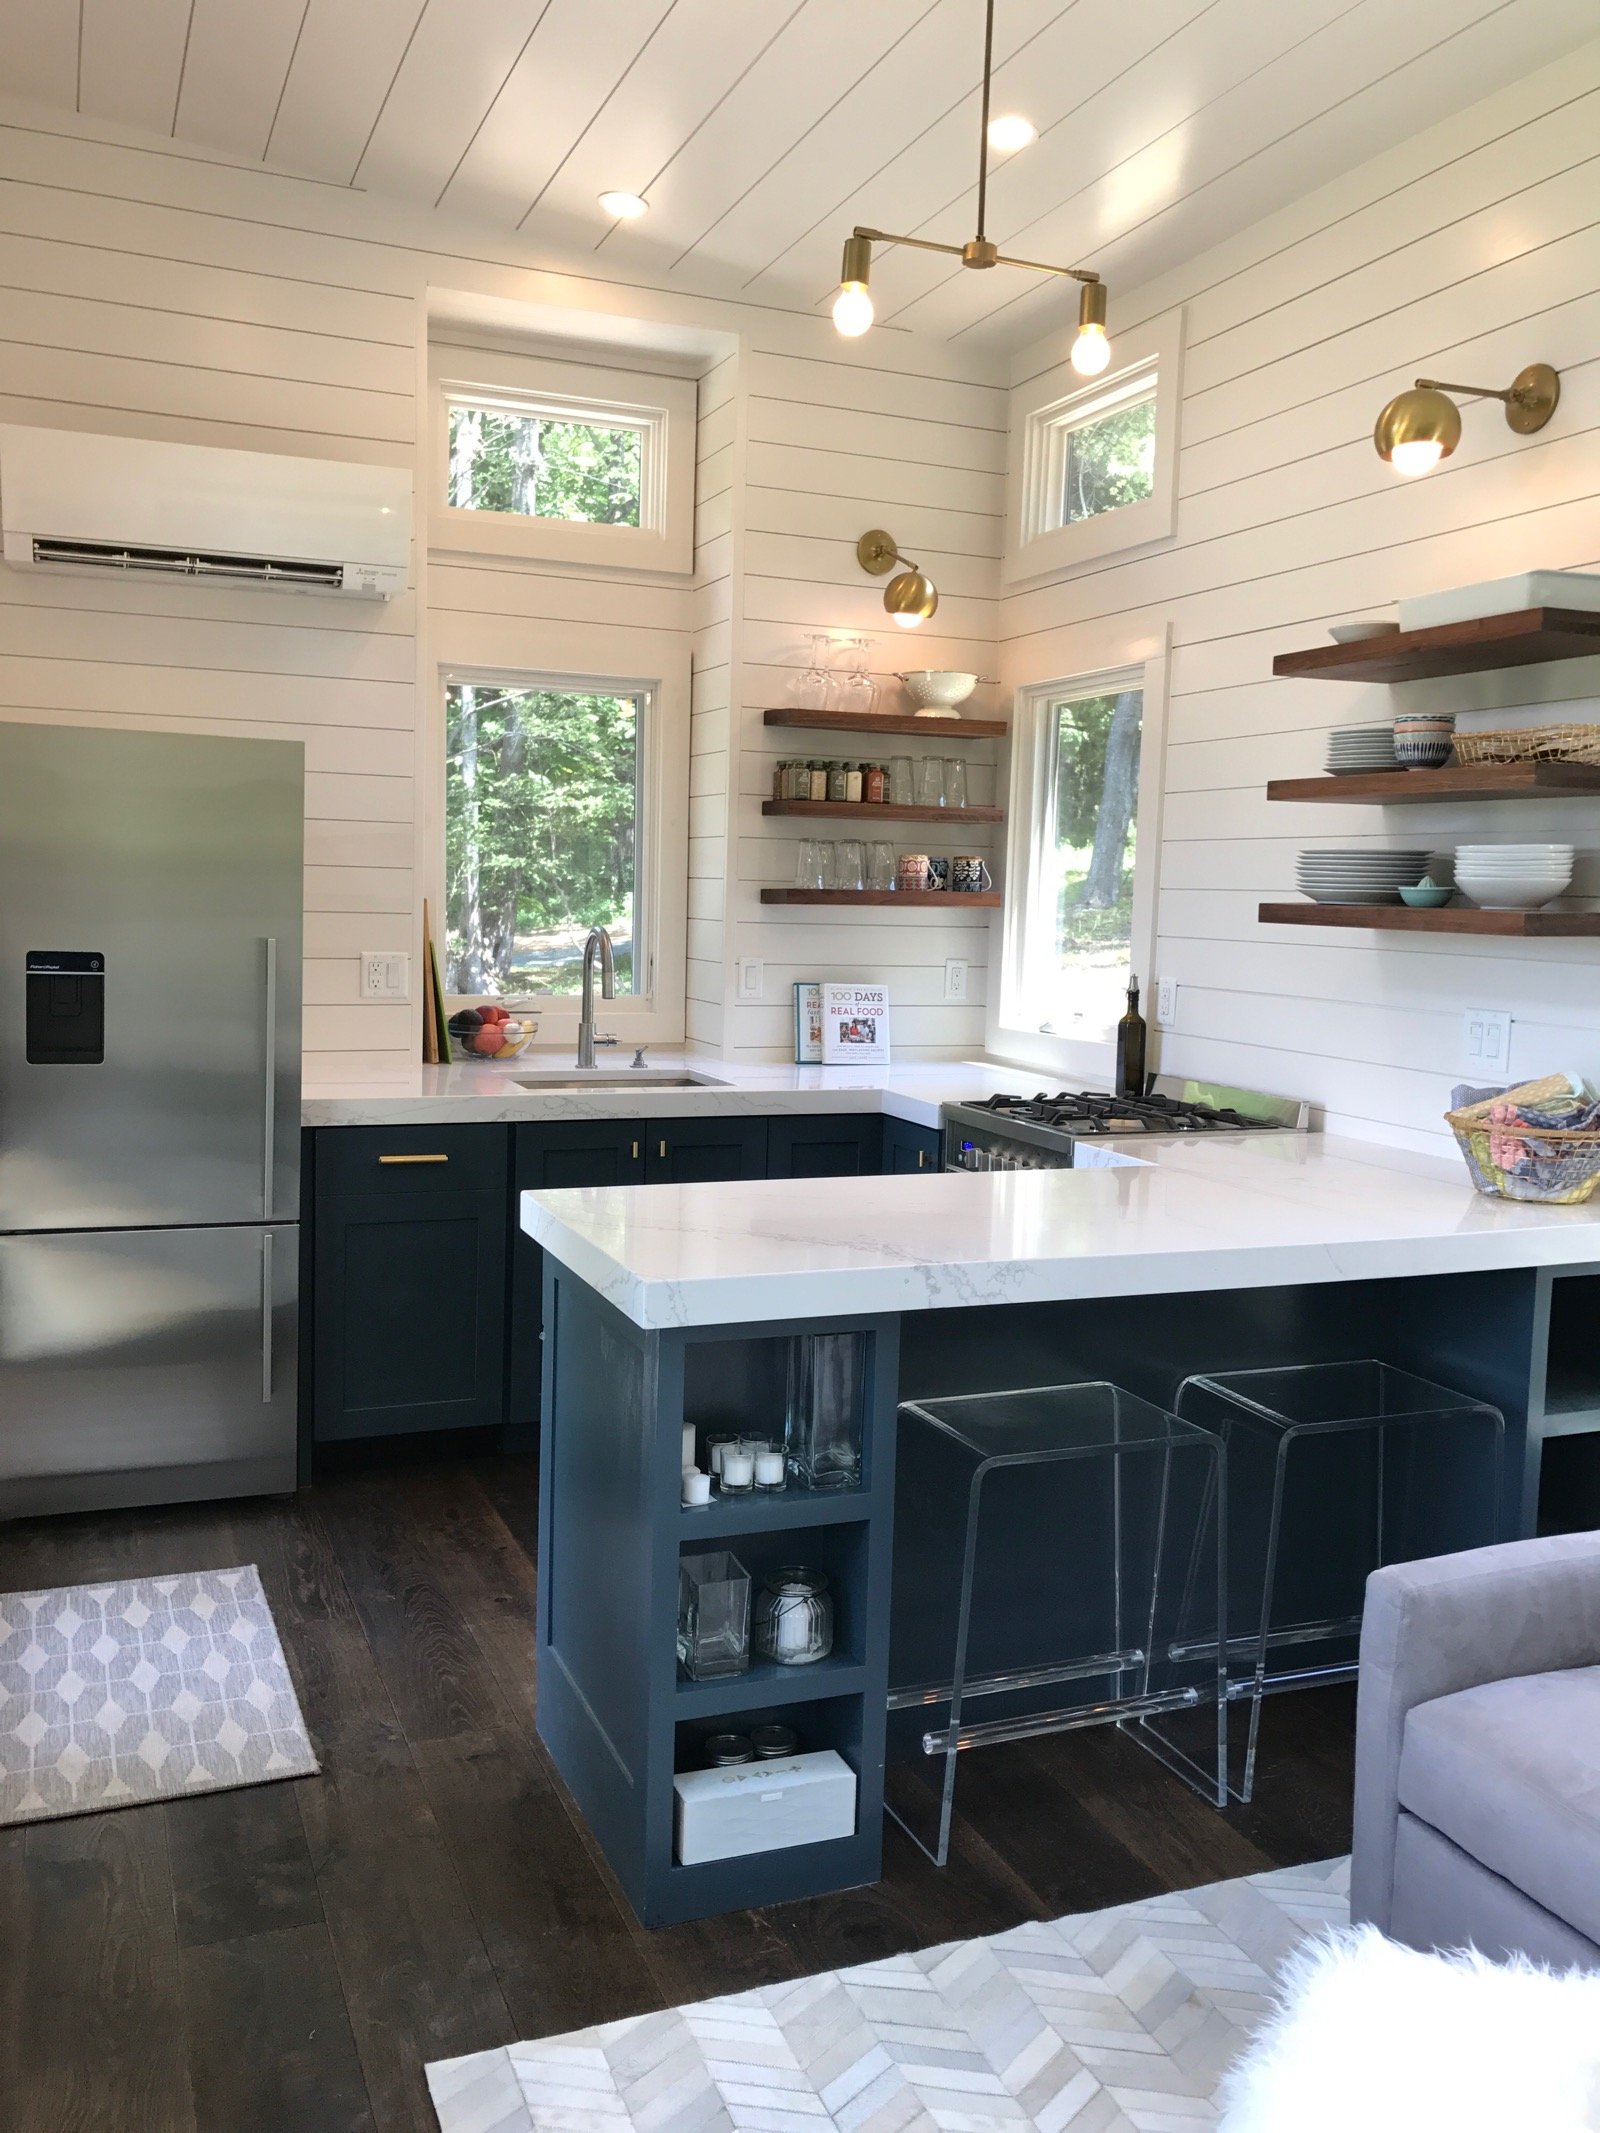 Our Tiny House on Wheels on 100 Days of Real Food